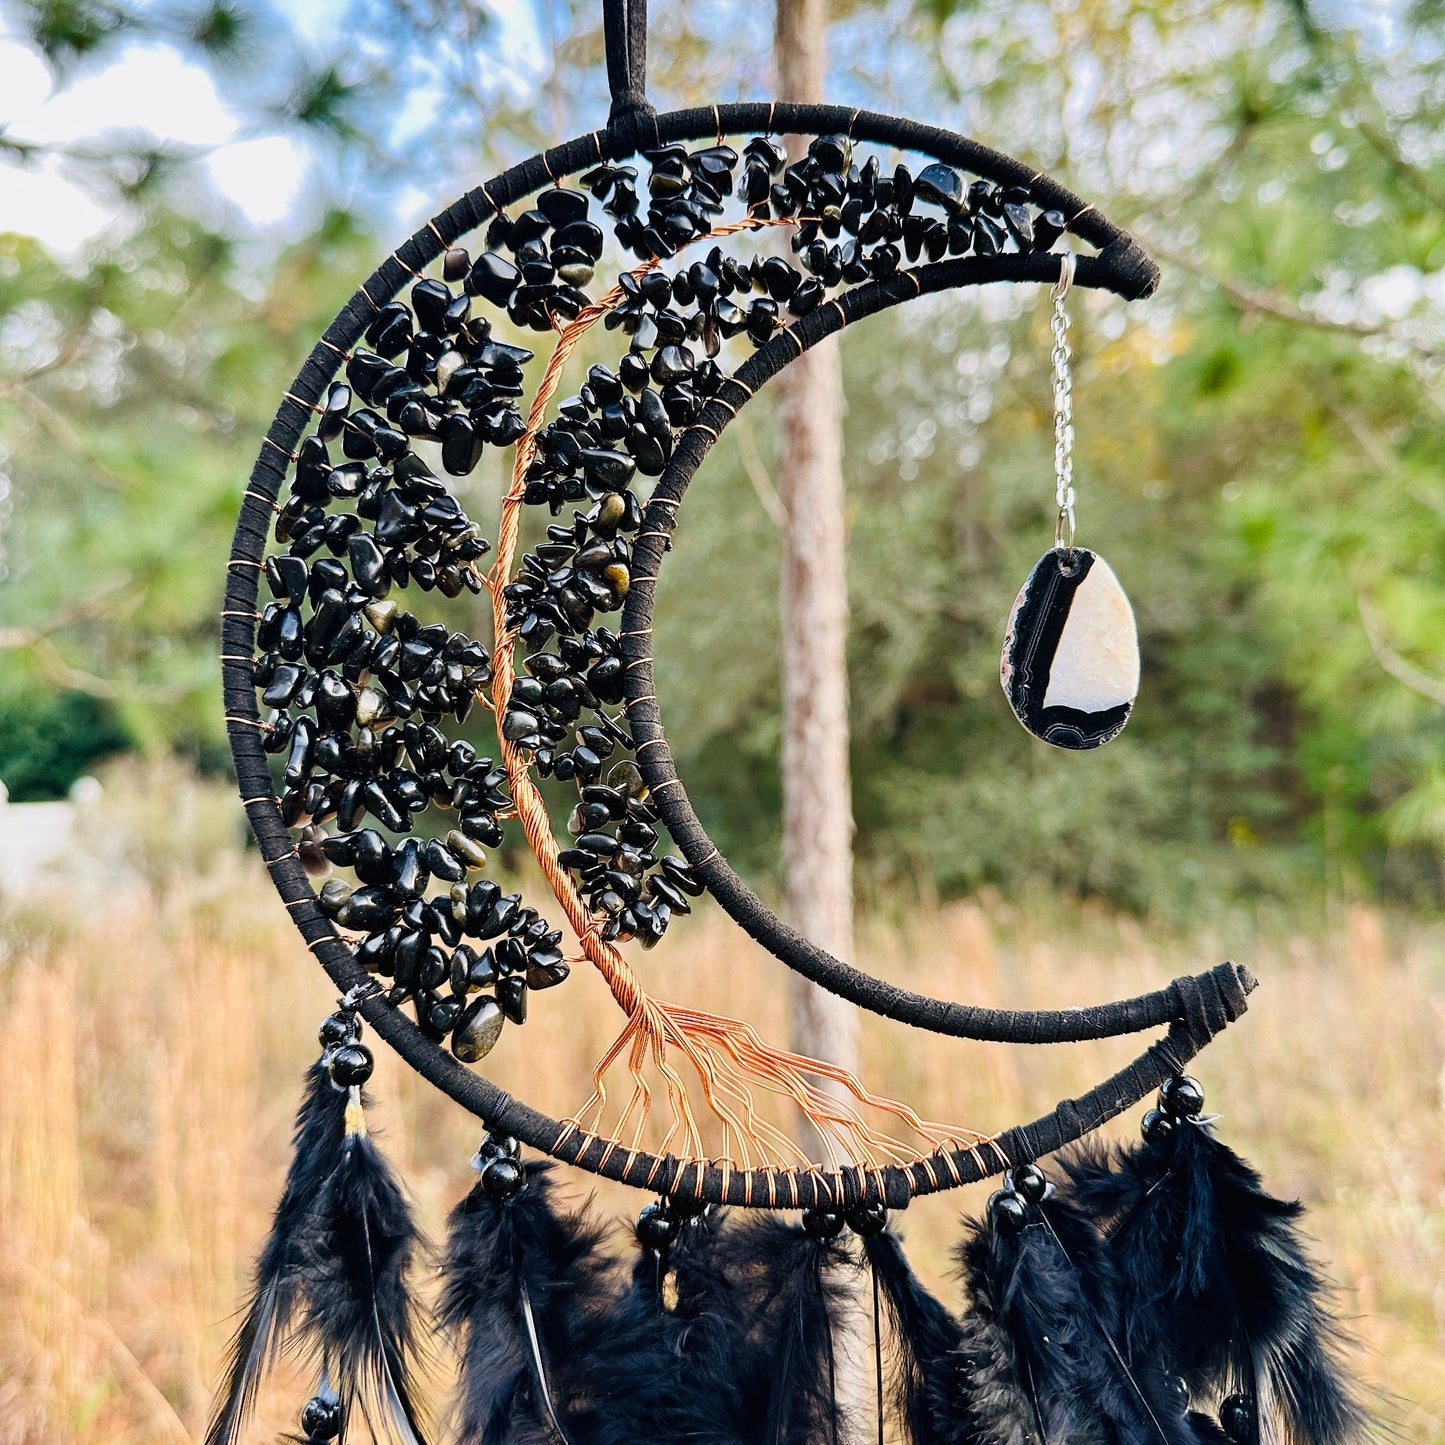 Medium Wall Hanging Crescent Moon Dream Catcher with Black Obsidian Stones & Hanging Stone Charm with Feathers Blacked Out Modern Home Decor